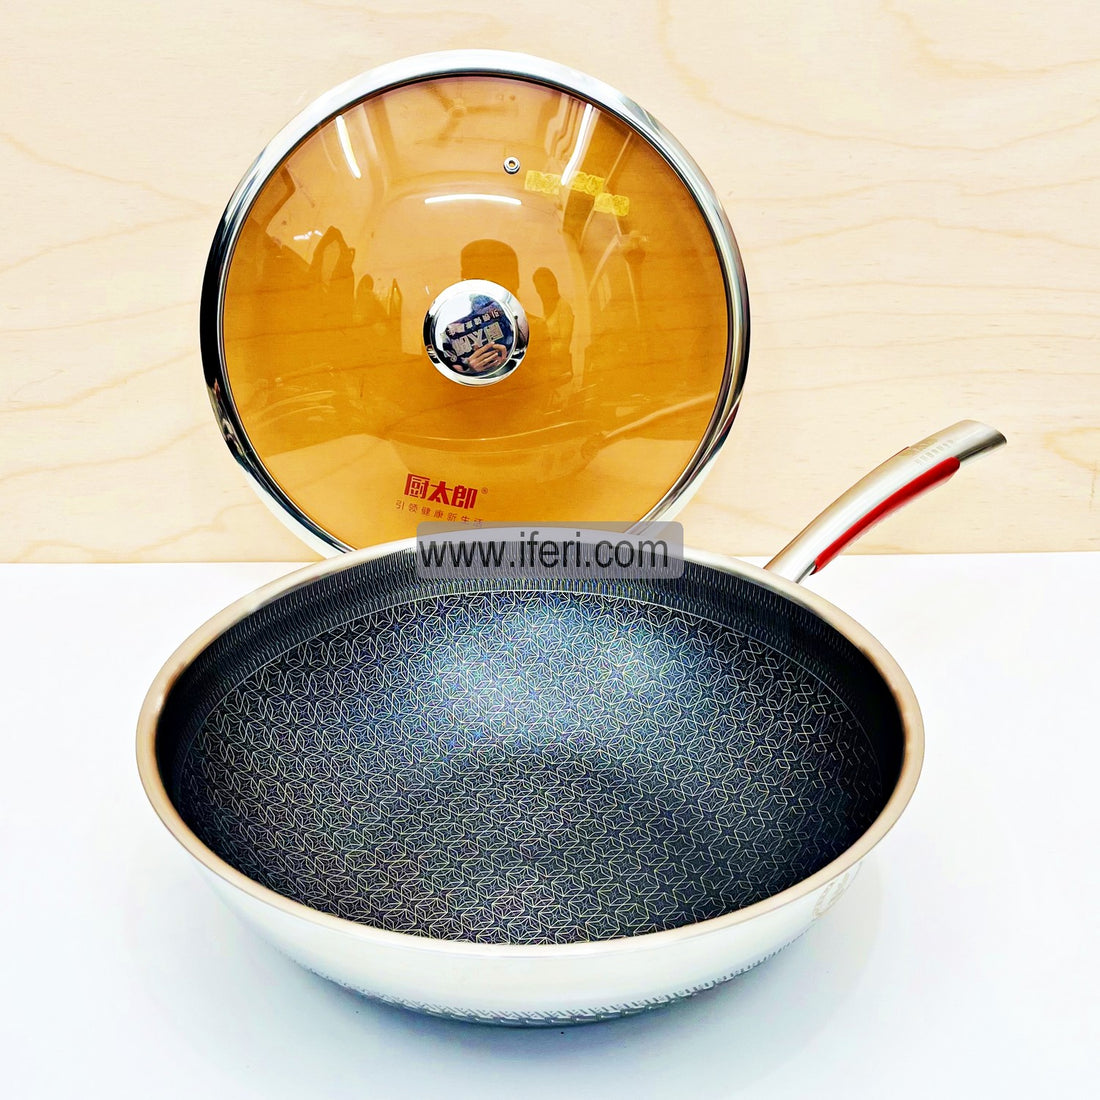 32 cm High Quality Stainless Steel Non-Stick Honeycomb Wok Pan With Glass Lid RY4686